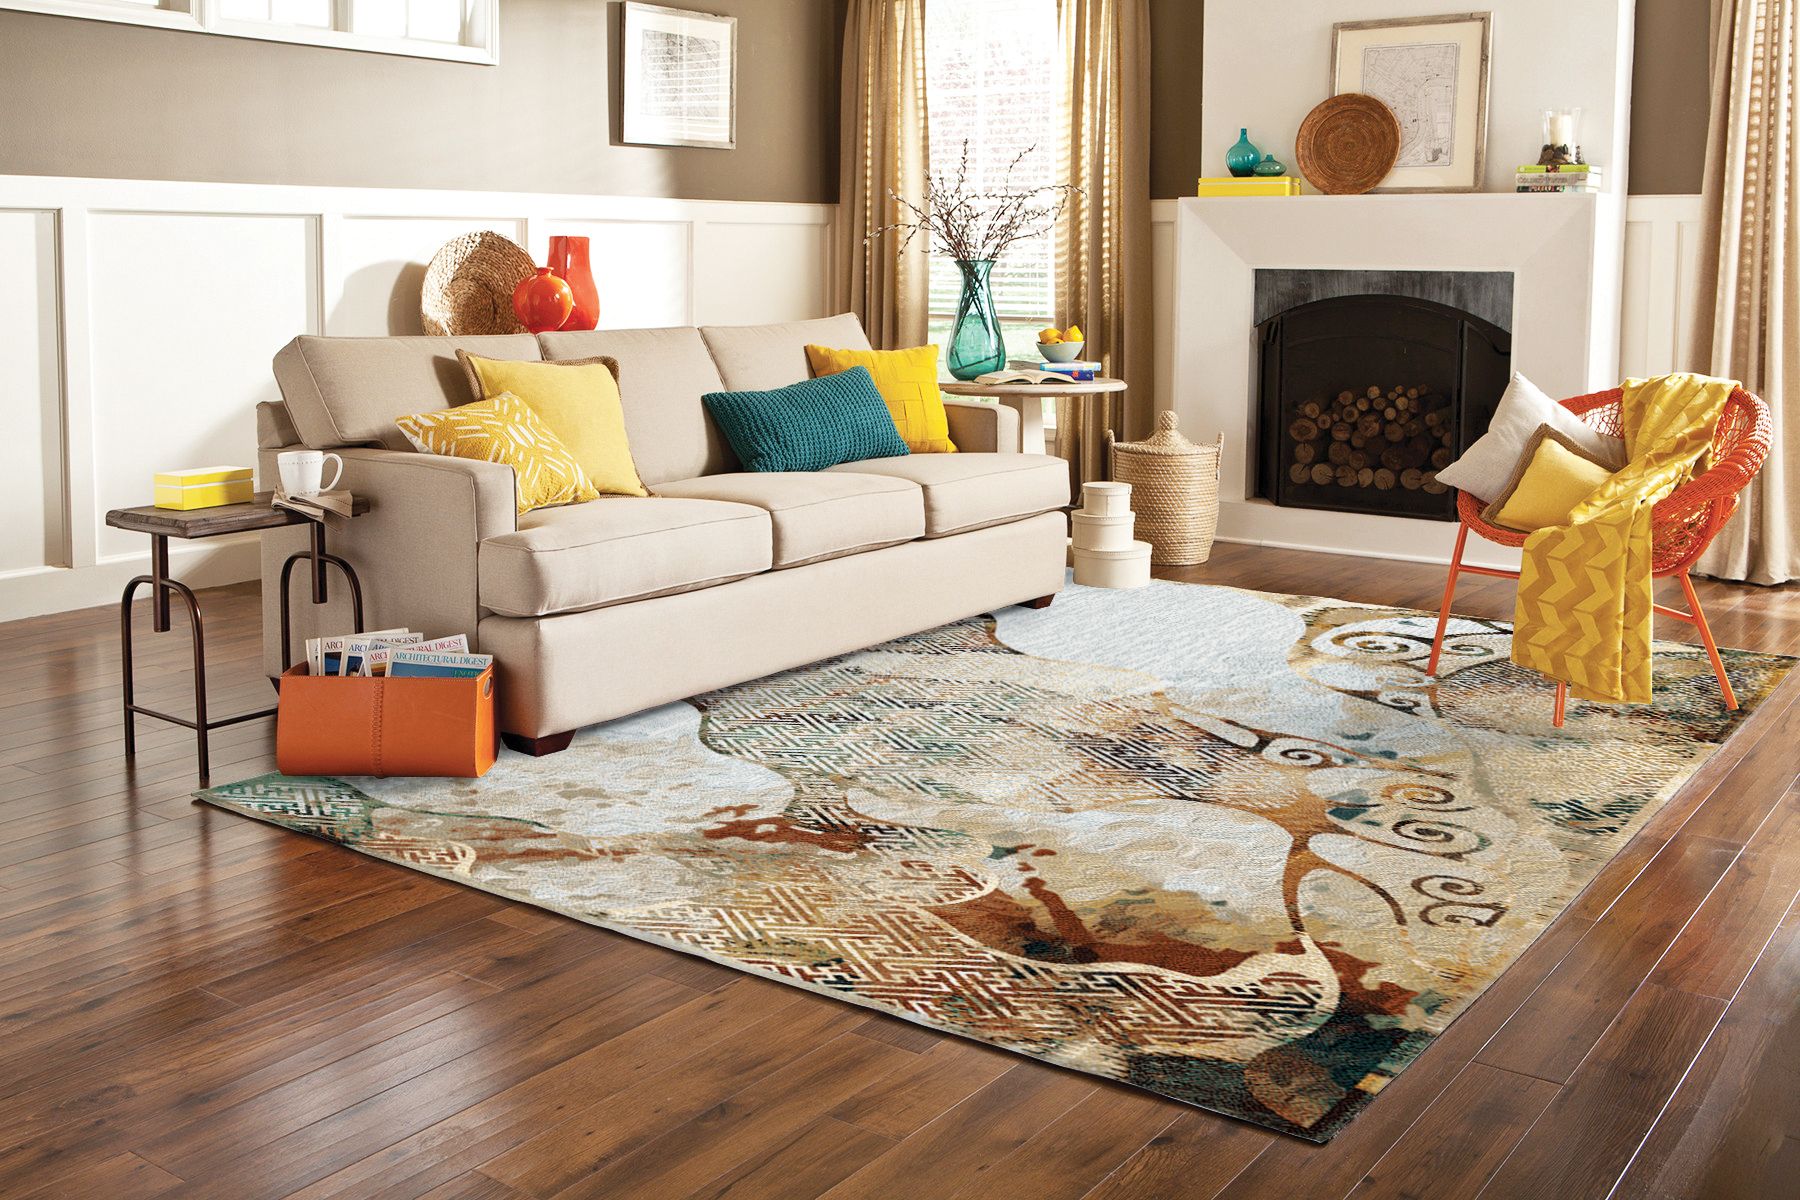 How To Choose Rug Color For Living Room